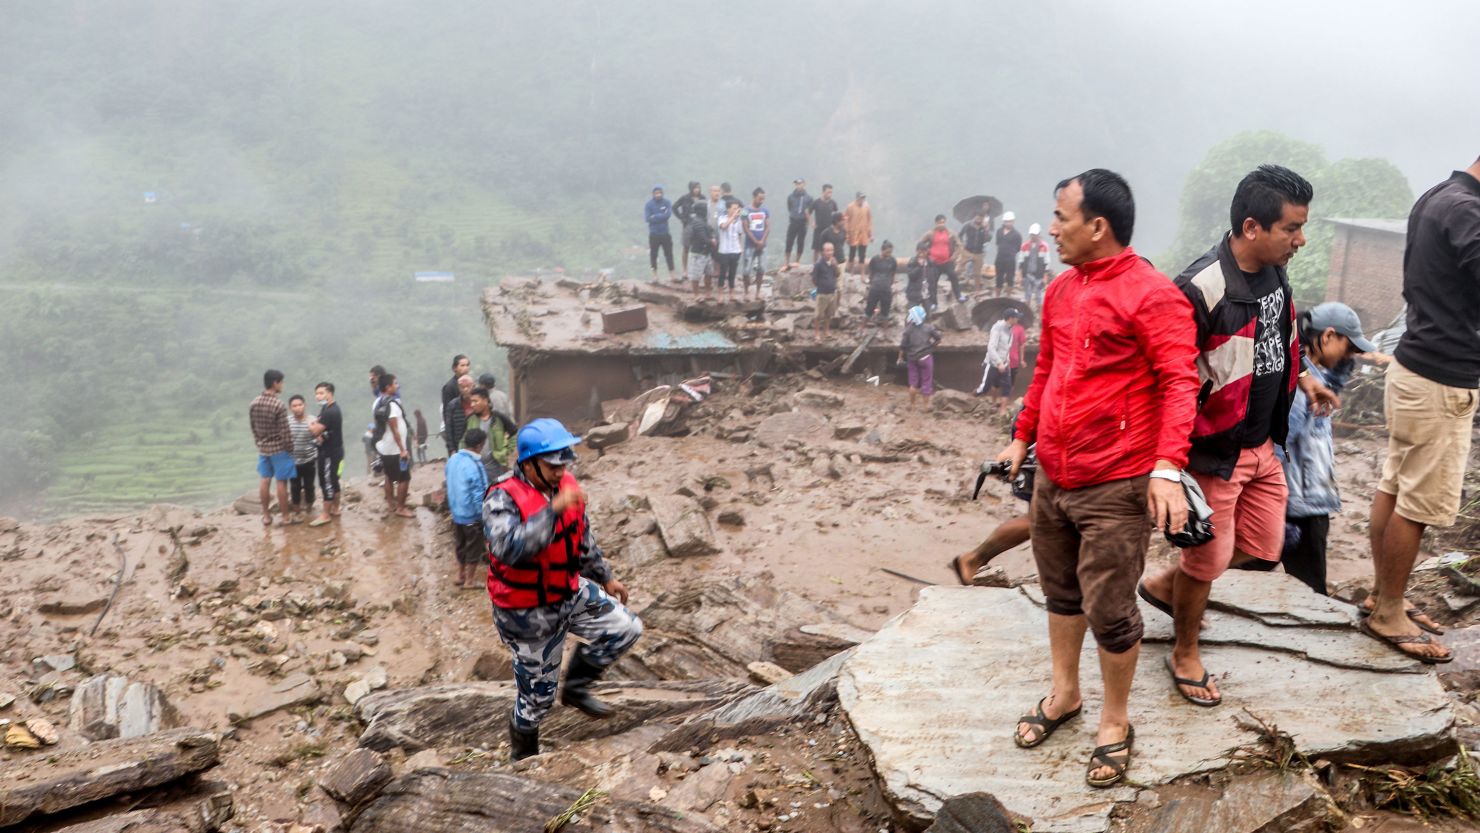 Rescue workers and residents gather for search at the scene of a landslide following heavy rains in Bahrabise municipality of Sindhupalchok district.